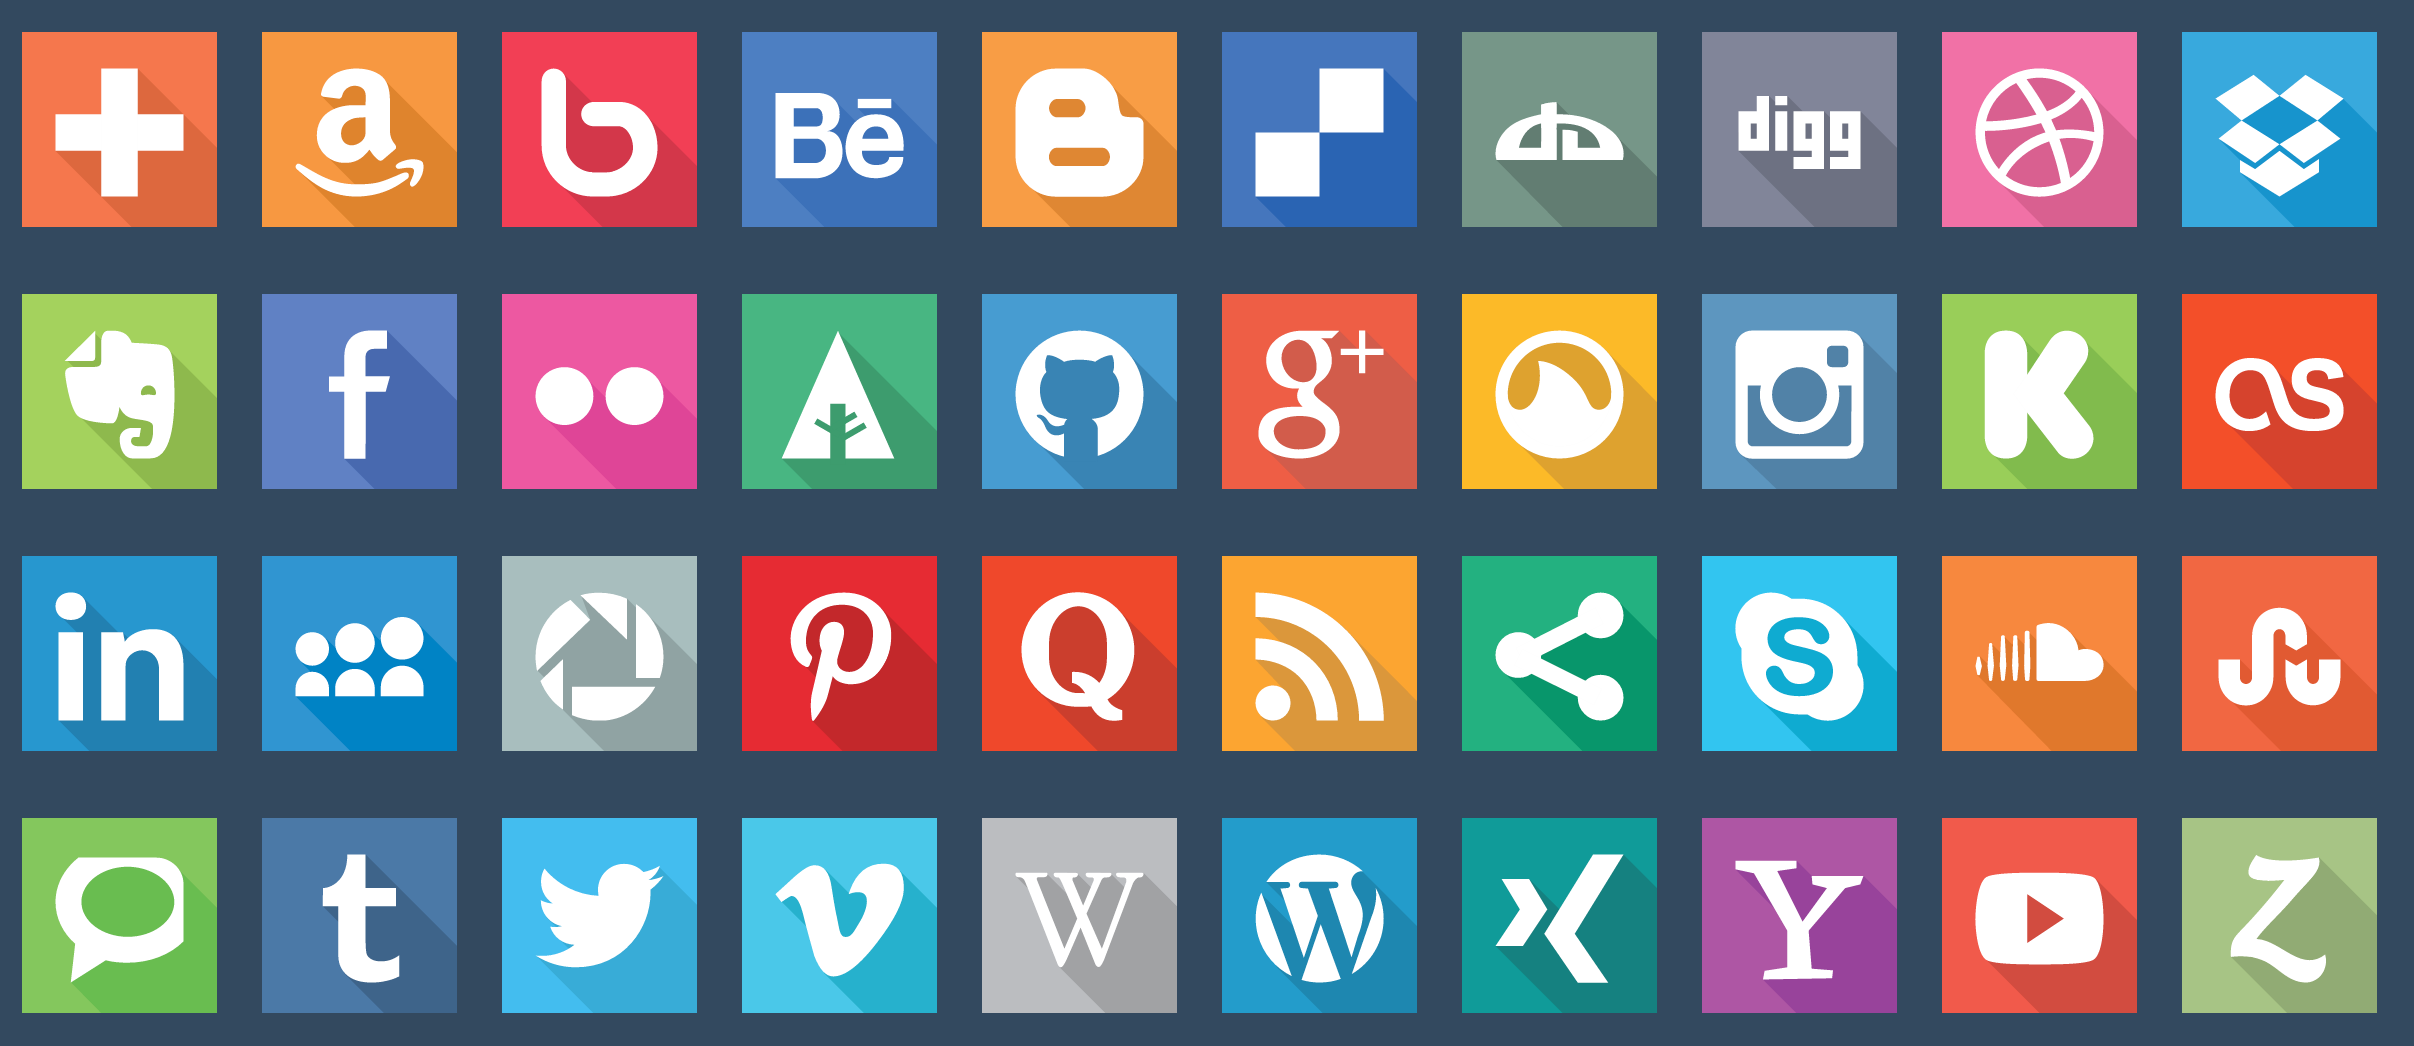 animated svg icons free download